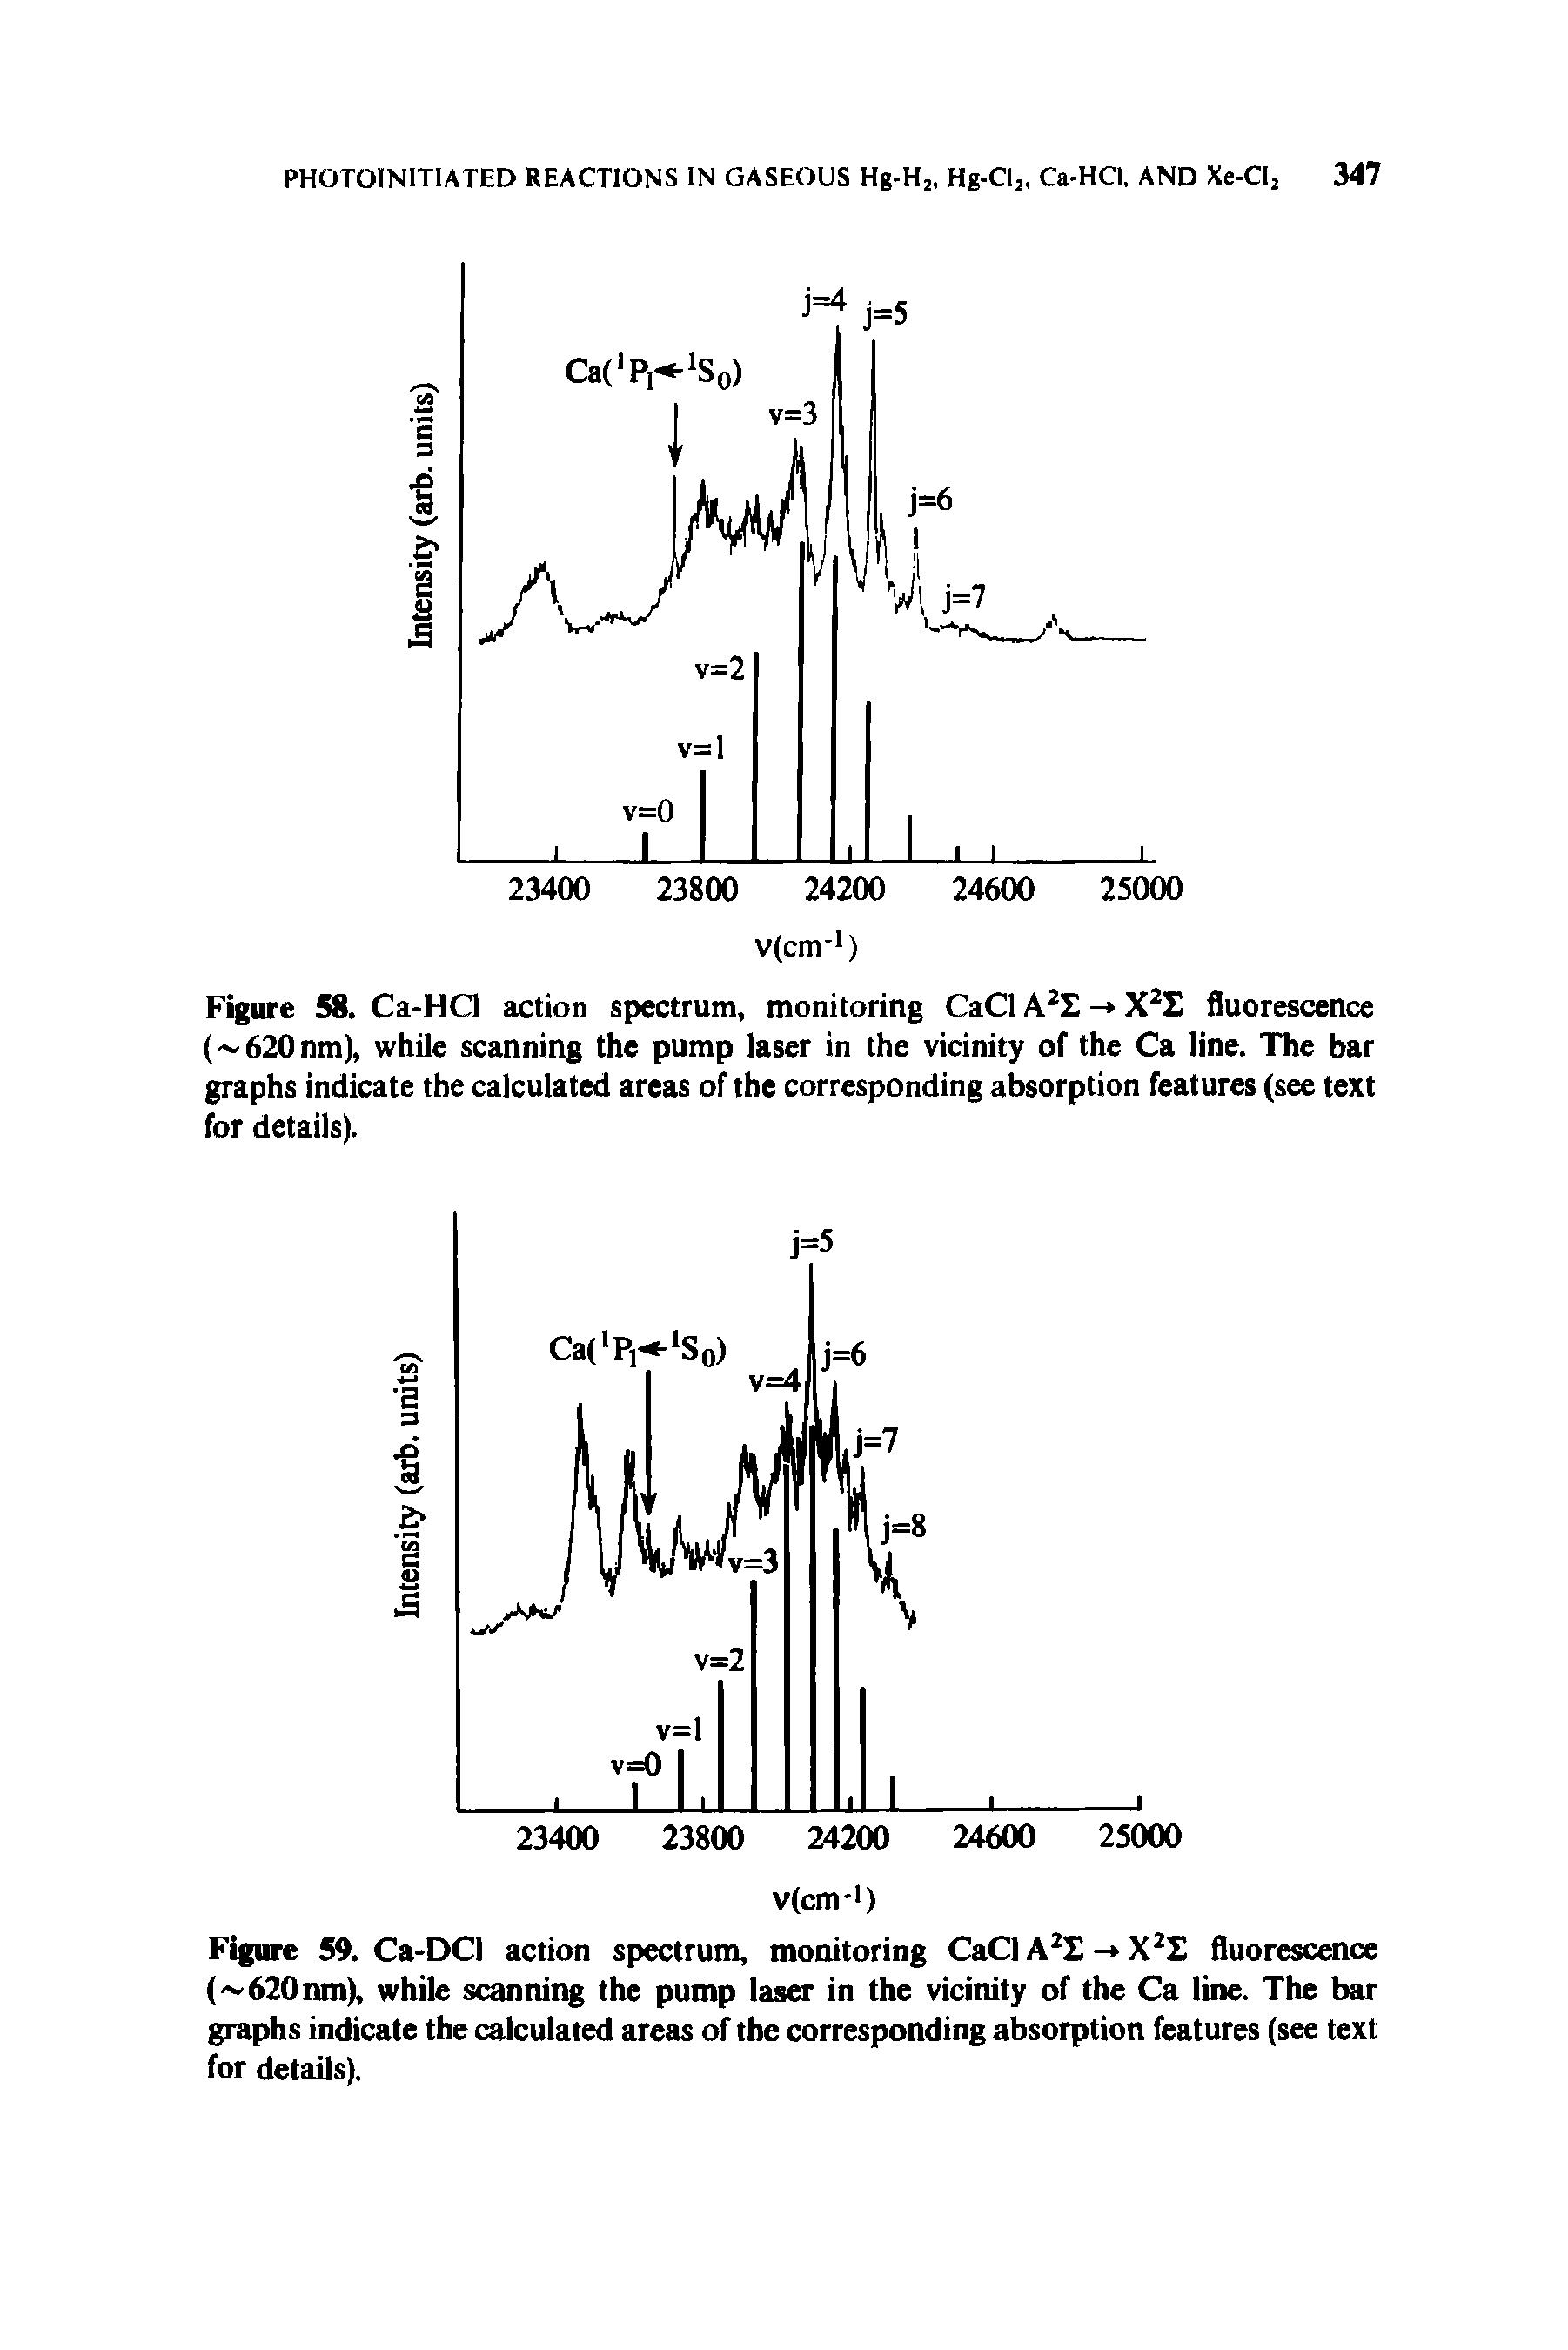 Figure 58. Ca-HCl action spectrum, monitoring CaCl - fluorescence ( 620nm), while scanning the pump laser in the vicinity of the Ca line. The bar graphs indicate the calculated areas of the corresponding absorption features (see text for details).